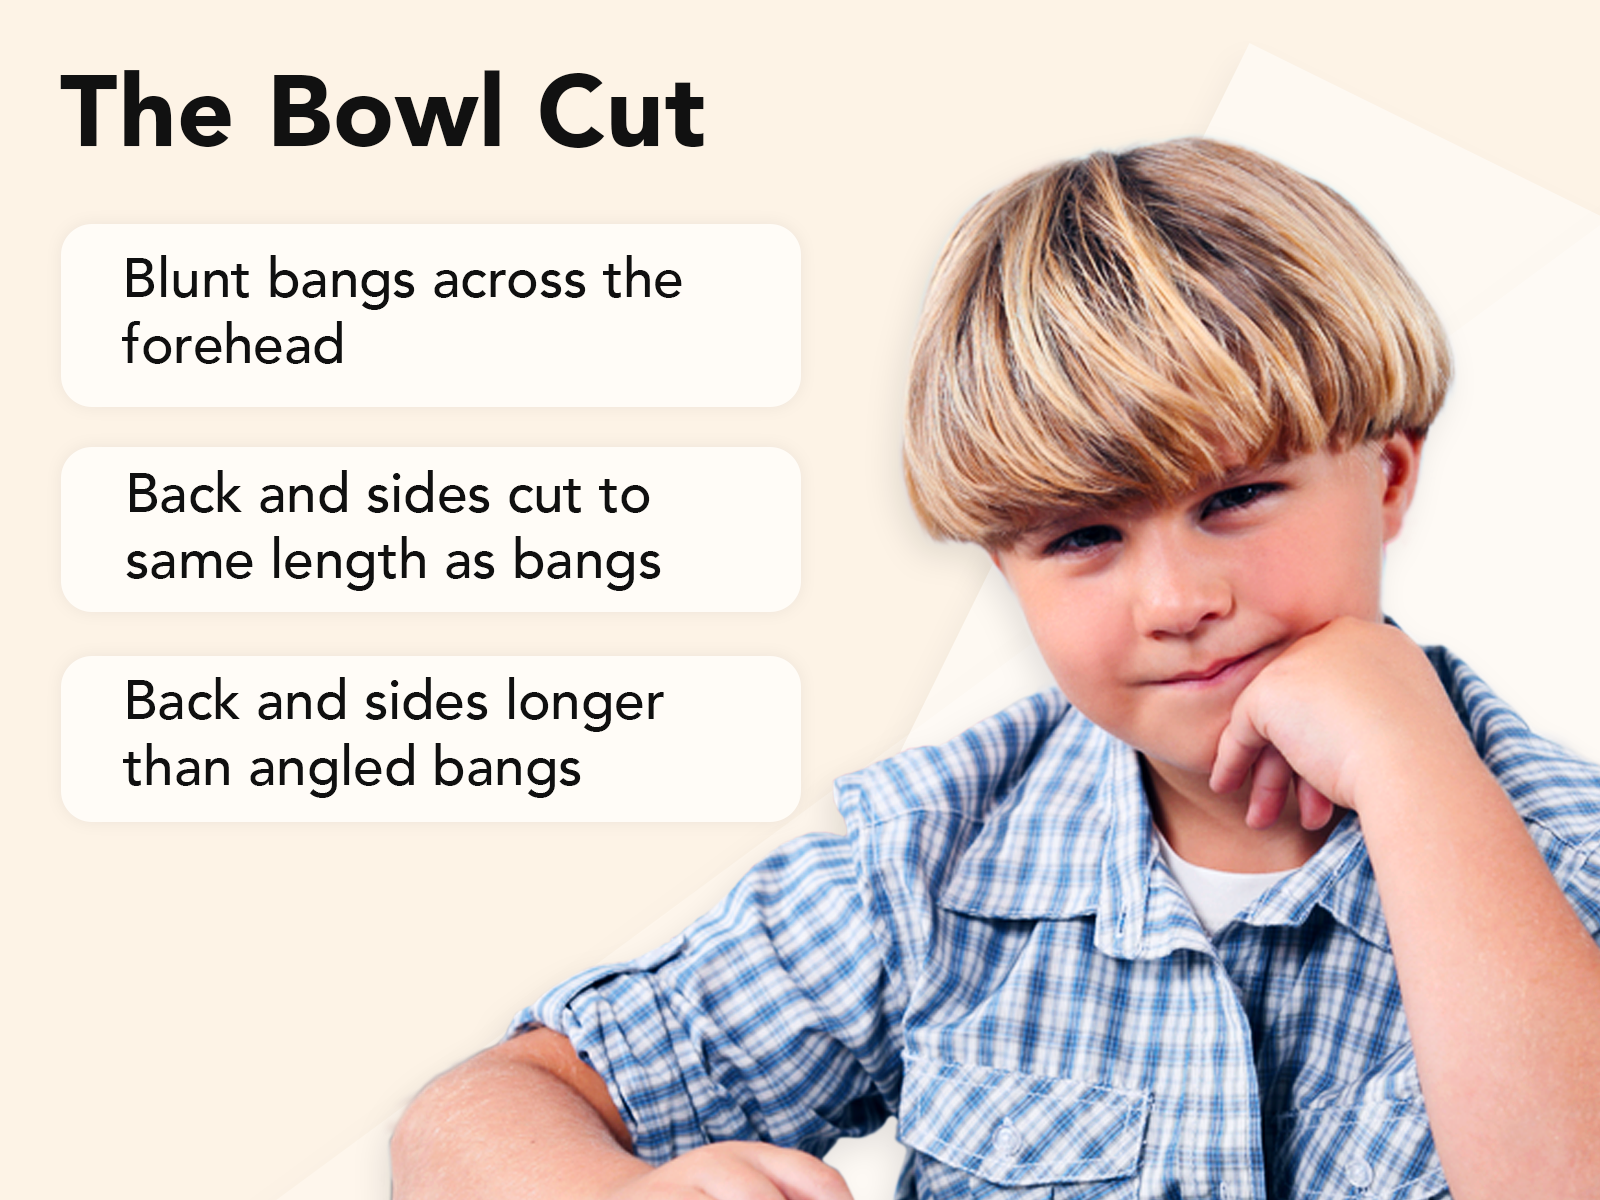 Bowl cut hairstyle explainer image on a tan background